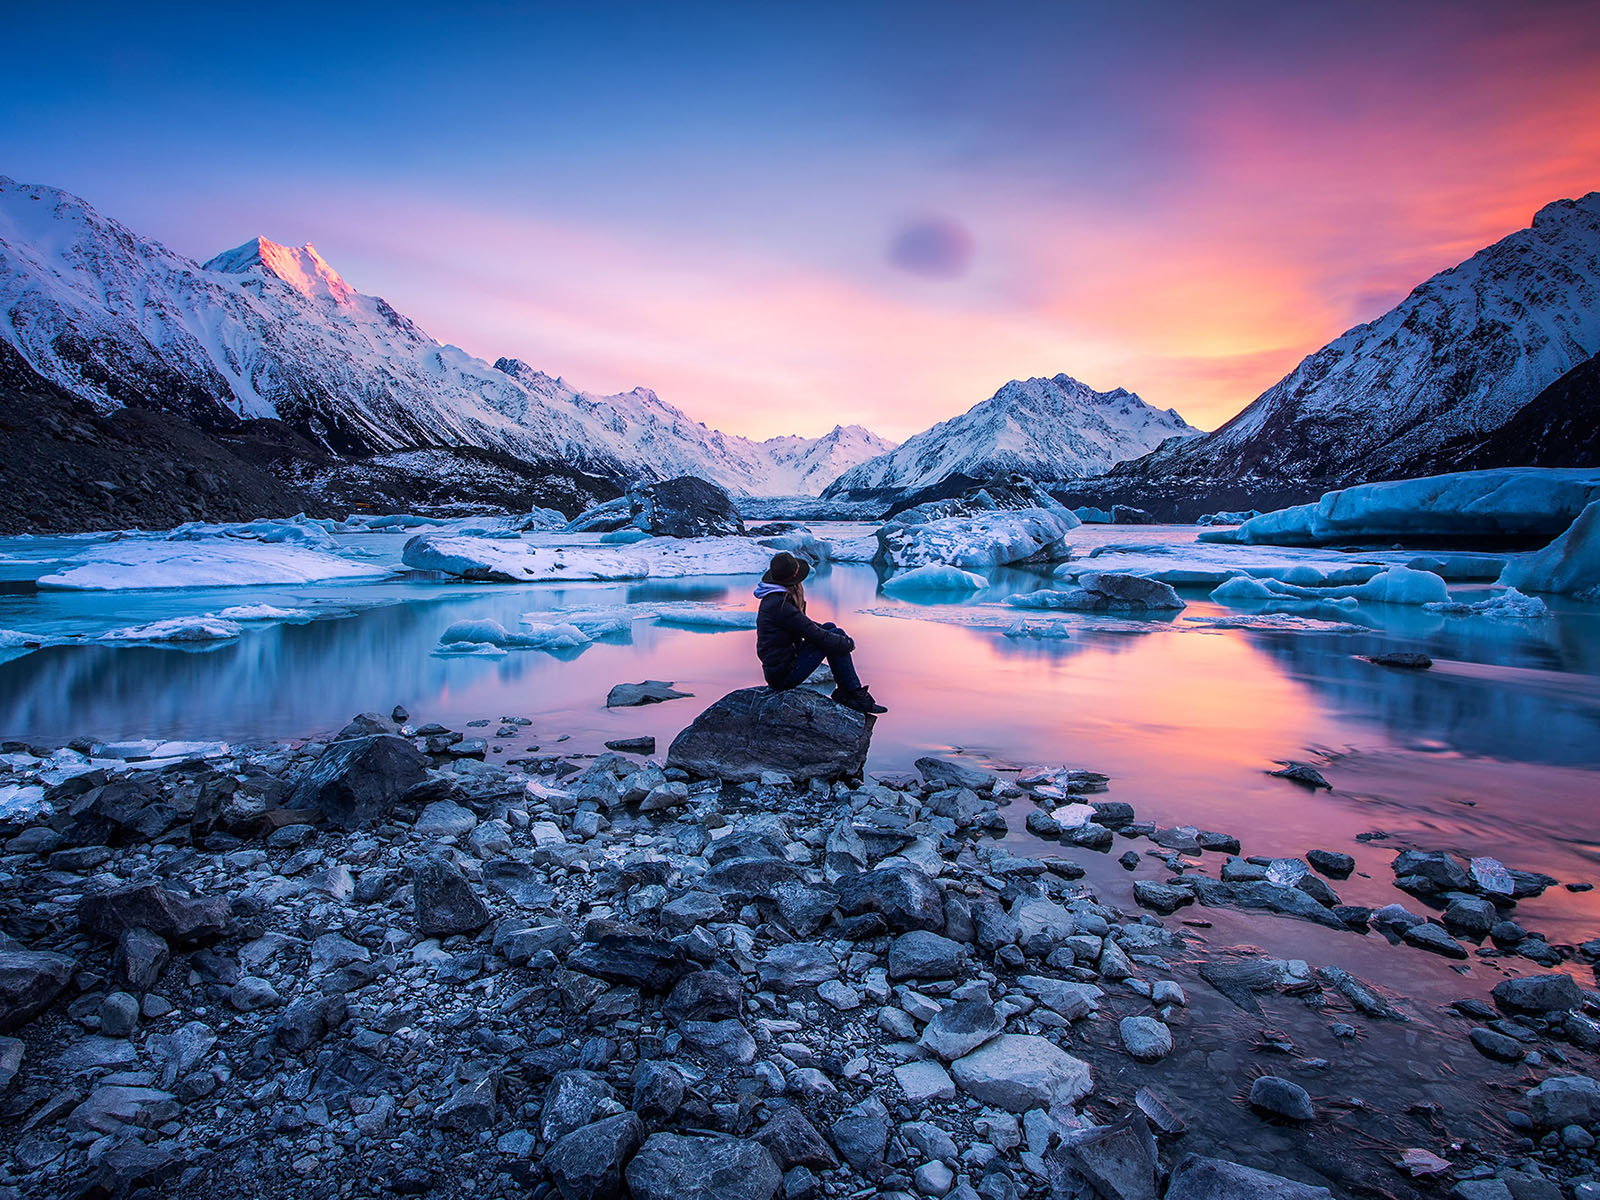 Unfortunately, Most People Will Struggle to Locate These Countries — Can You Get 17/25? Aoraki Mount Cook National Park, New Zealand Mountains